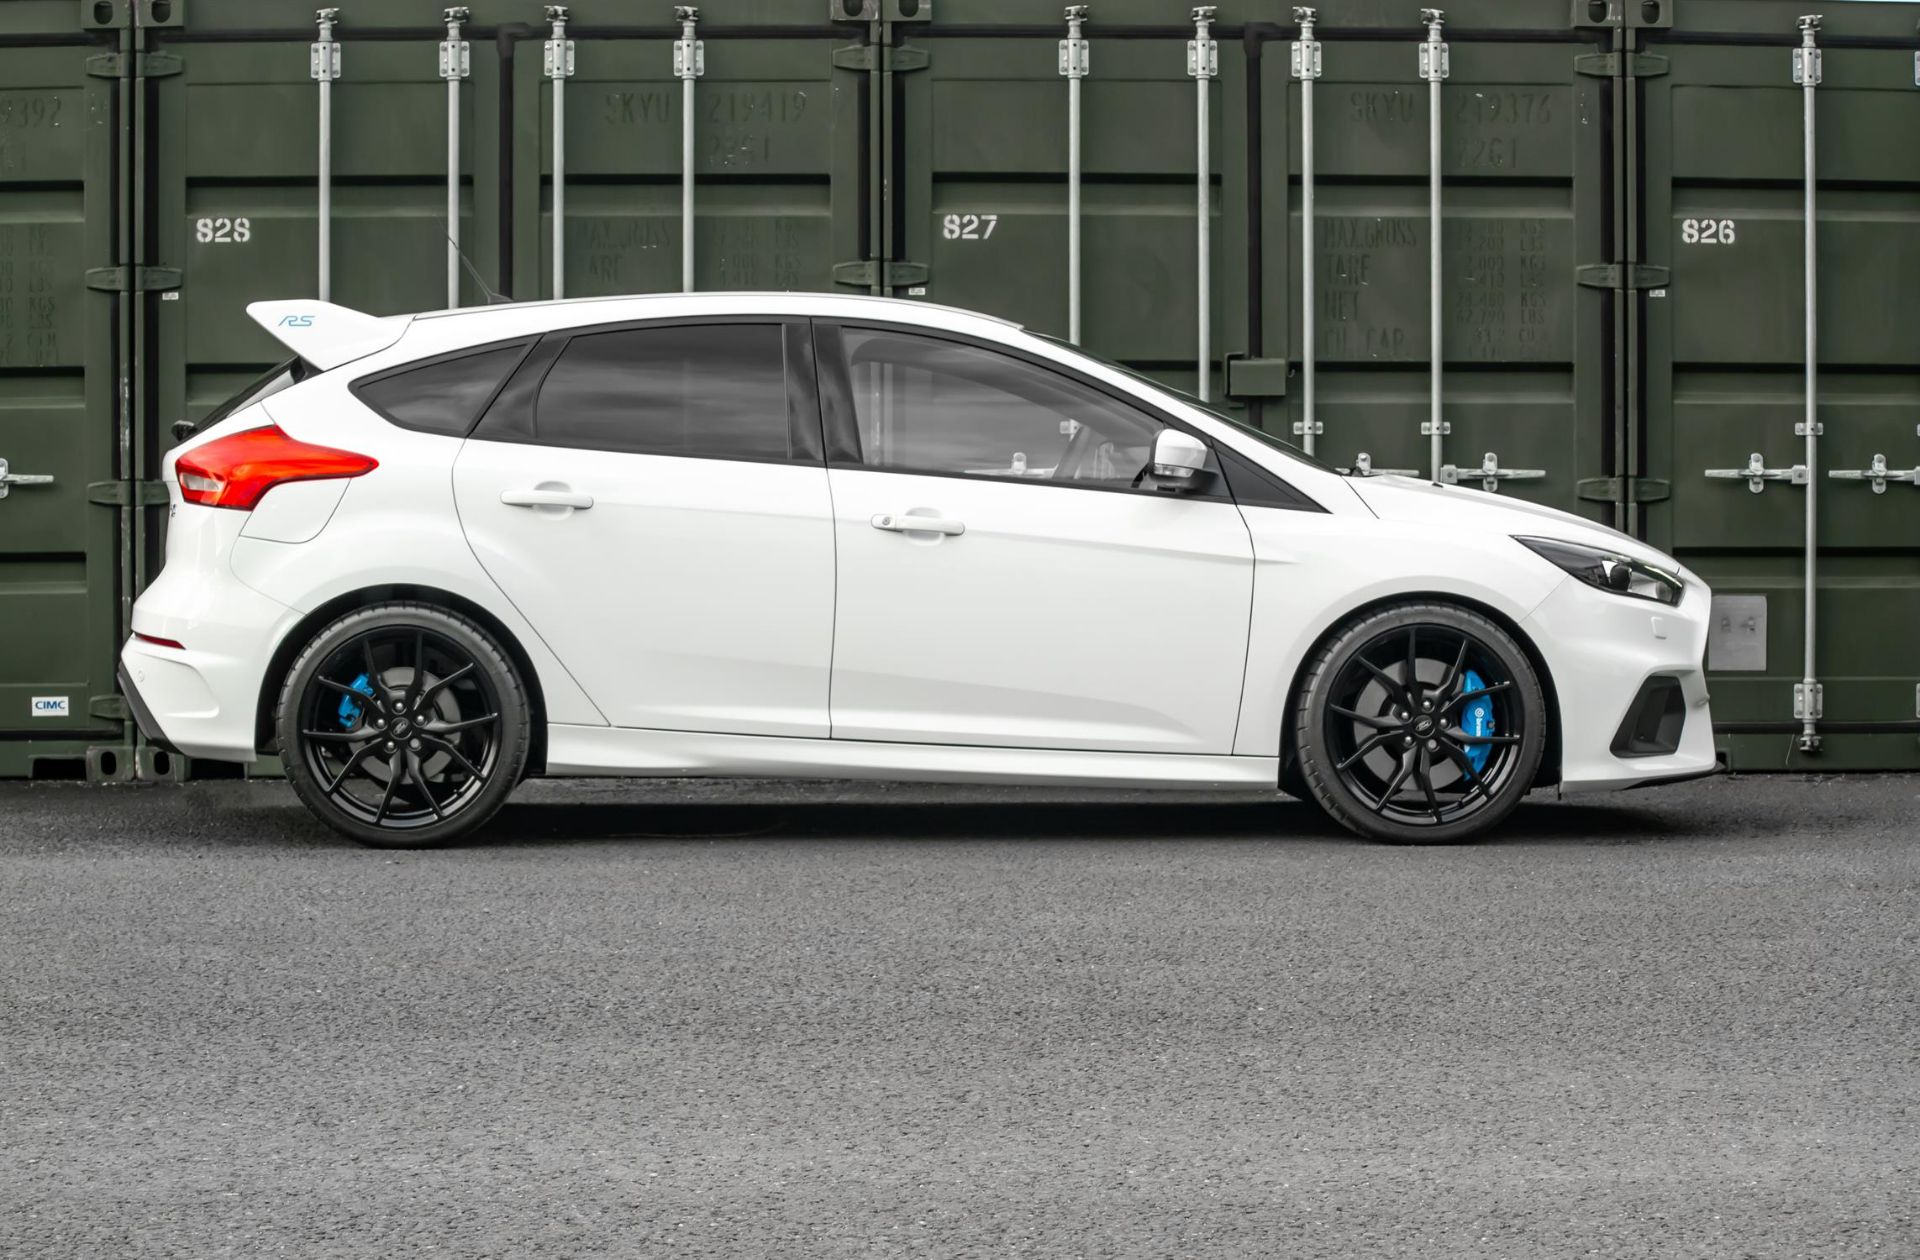 2016 Ford Focus RS Mk3 - Image 5 of 10